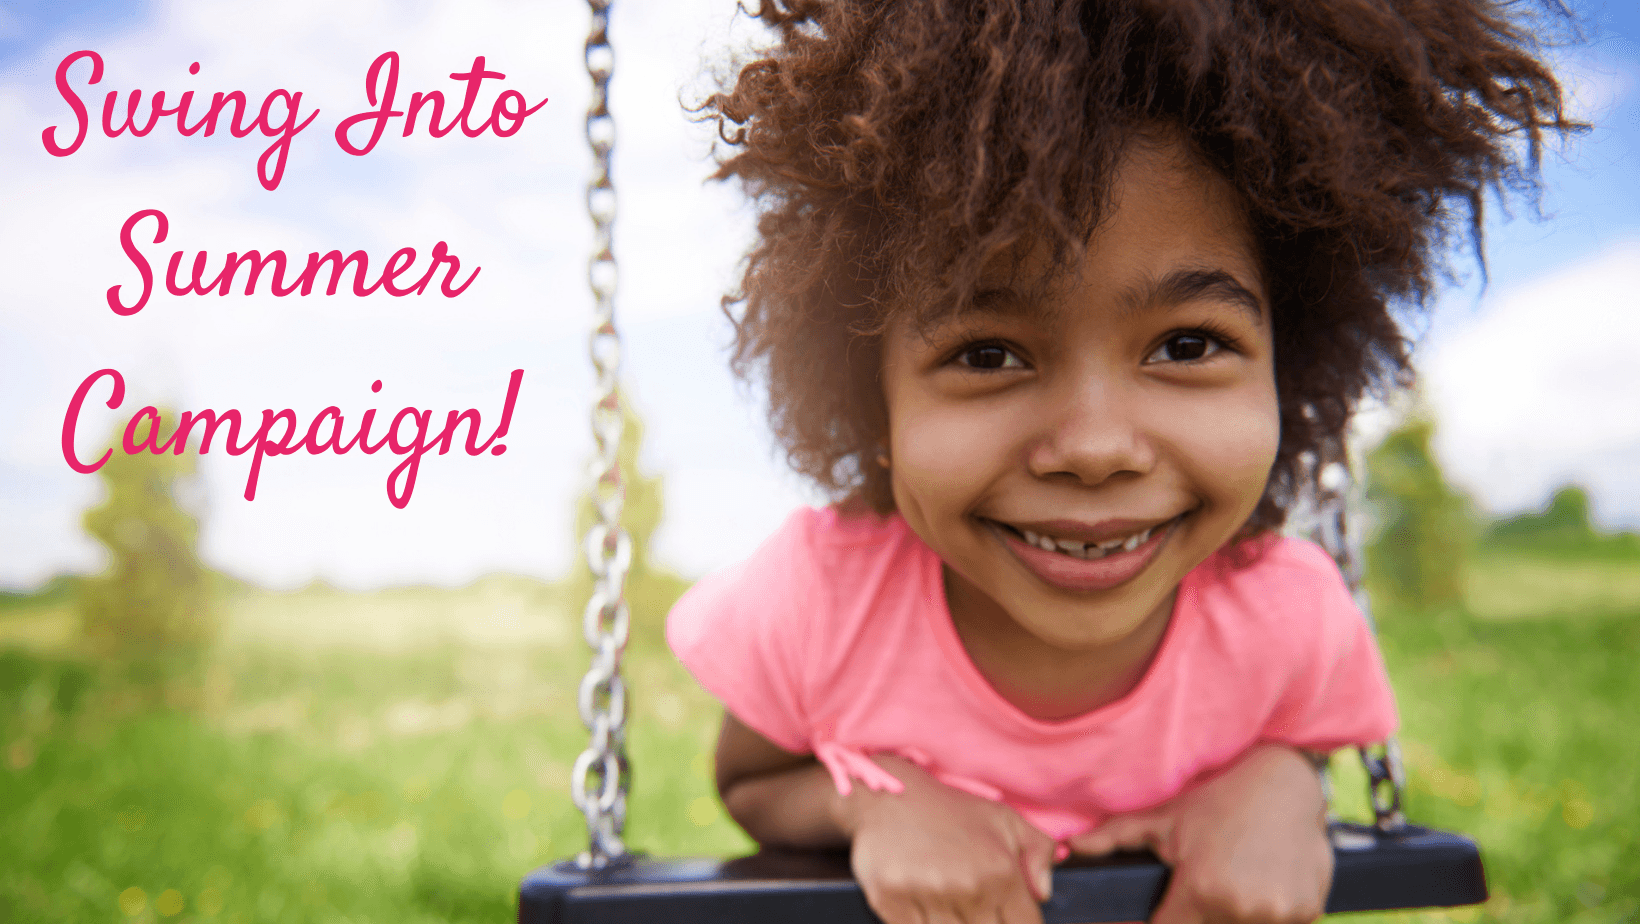 Help Our Kids Swing Into Summer!